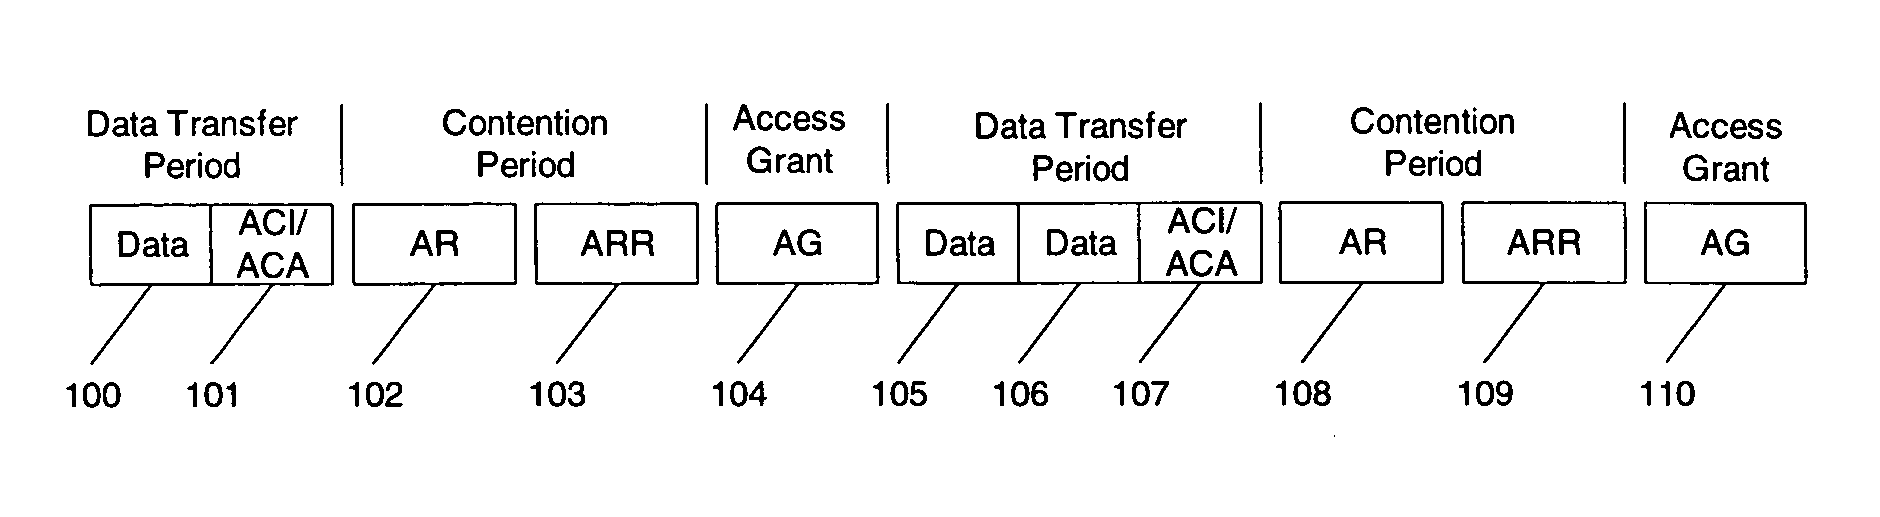 System and method for requesting and granting access to a network channel